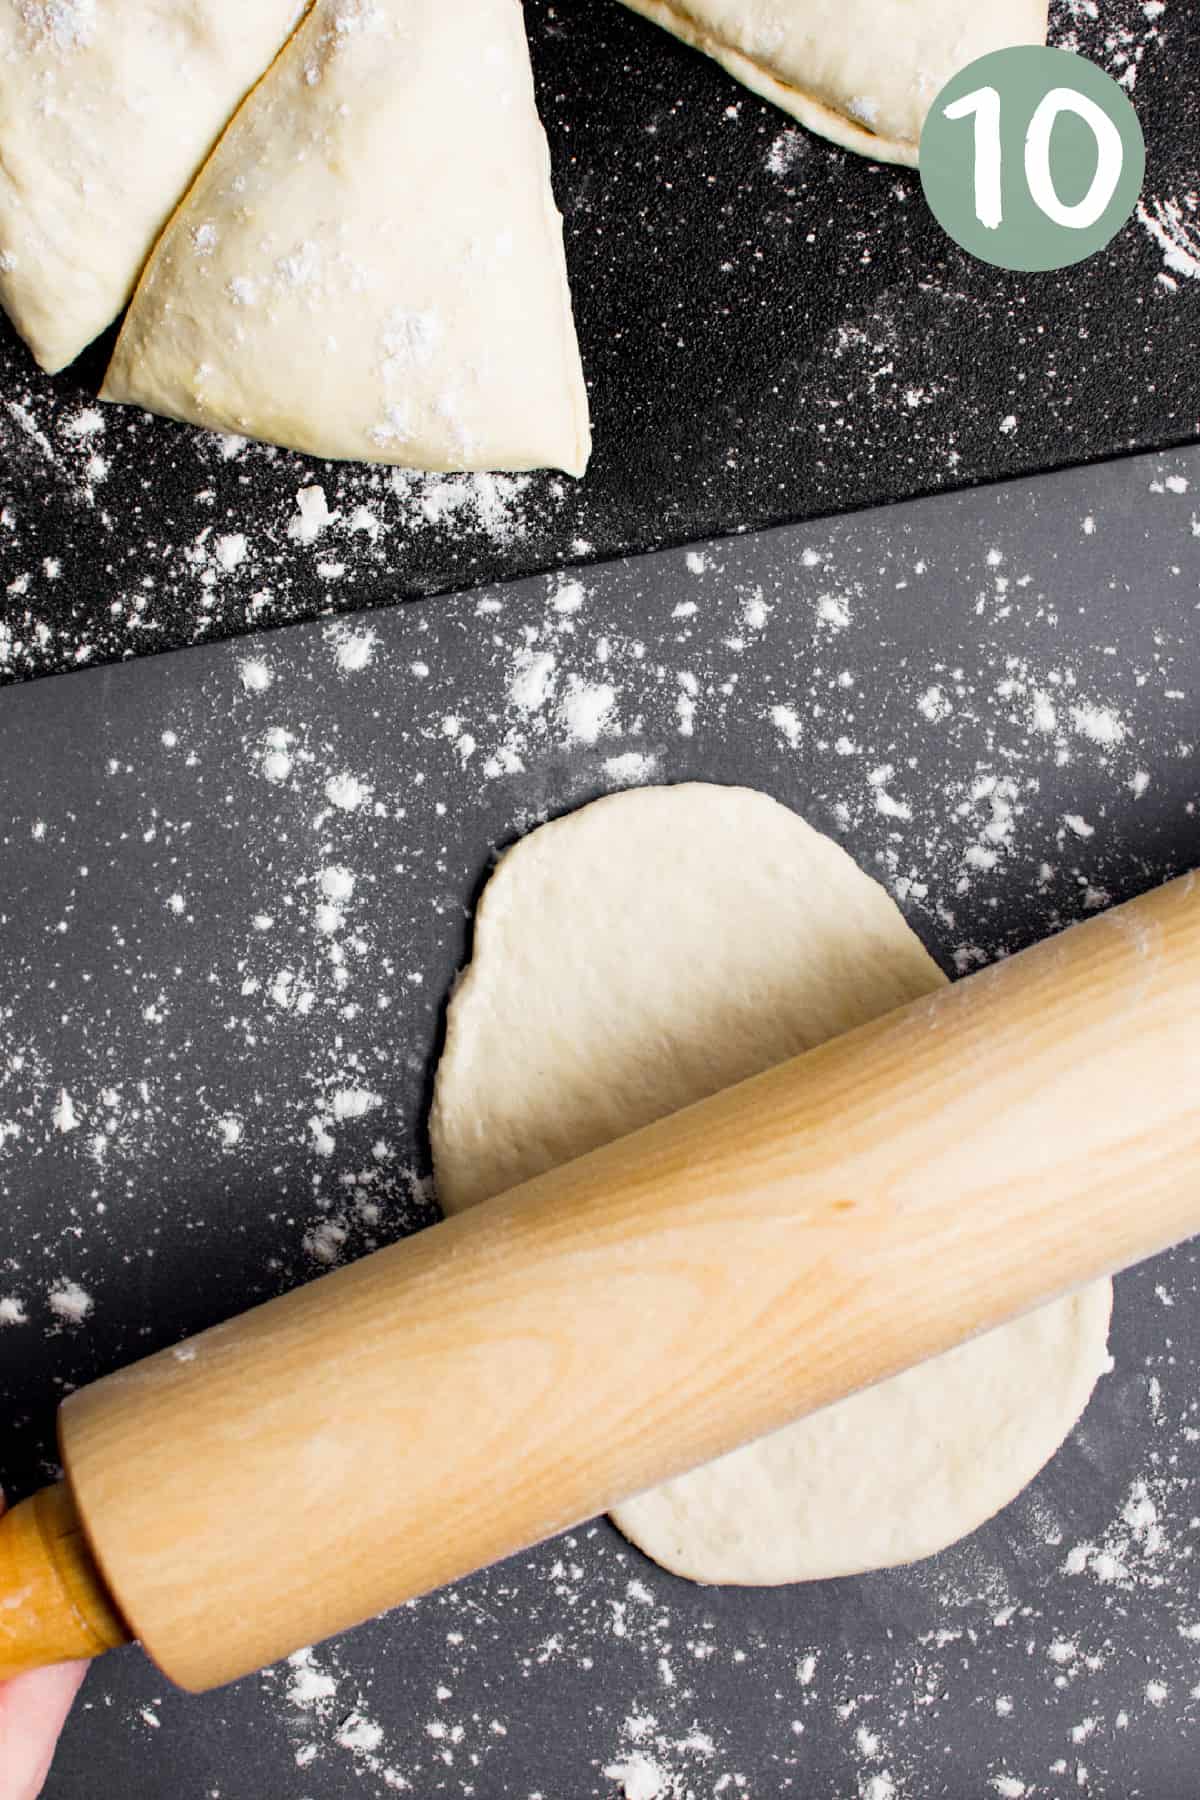 A rolling pin rolling dough out into an oval naan.